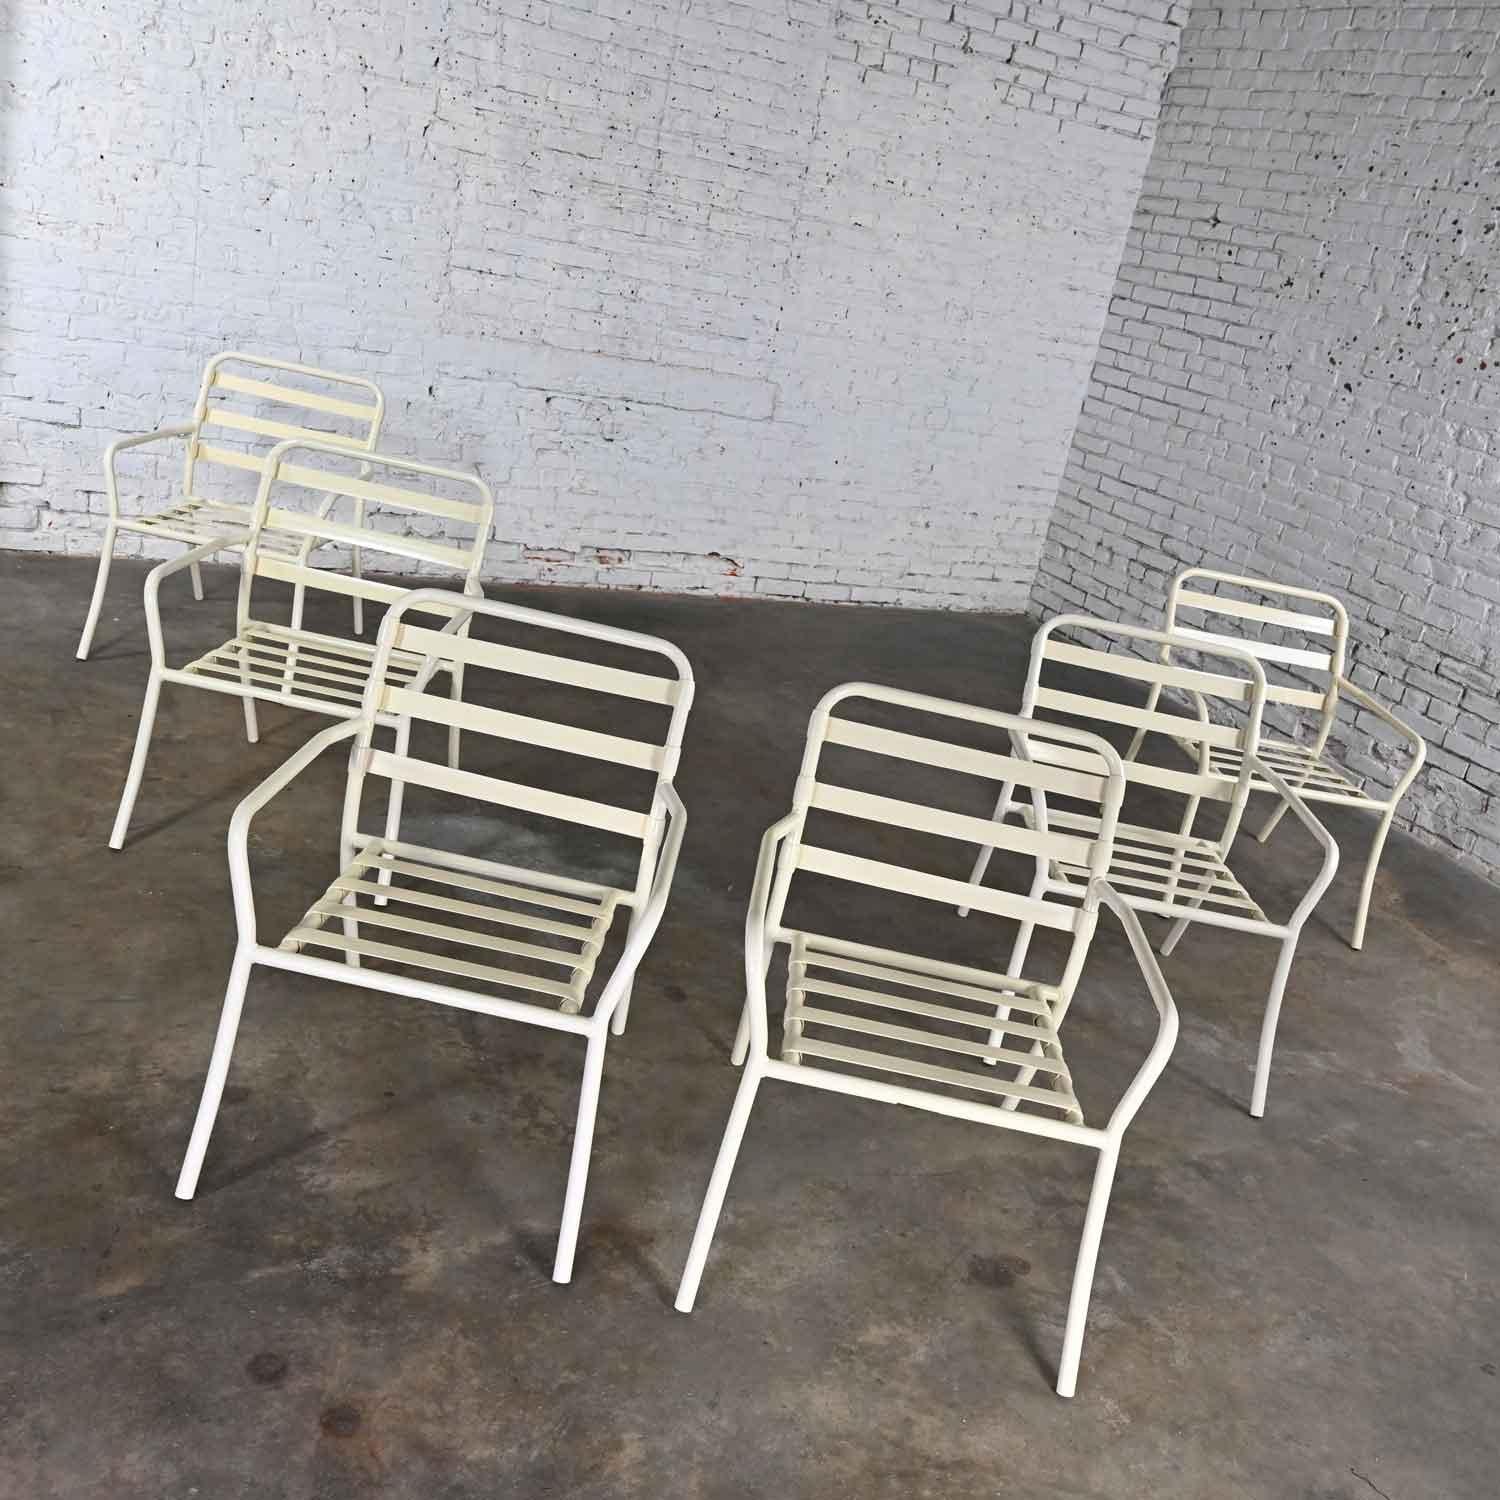 Wonderful vintage Tropitone outdoor chairs with vinyl straps & cushions, set of 6. Beautiful condition, keeping in mind that these are vintage and not new so will have signs of use and wear. The chair frames and cushions have been pressure washed